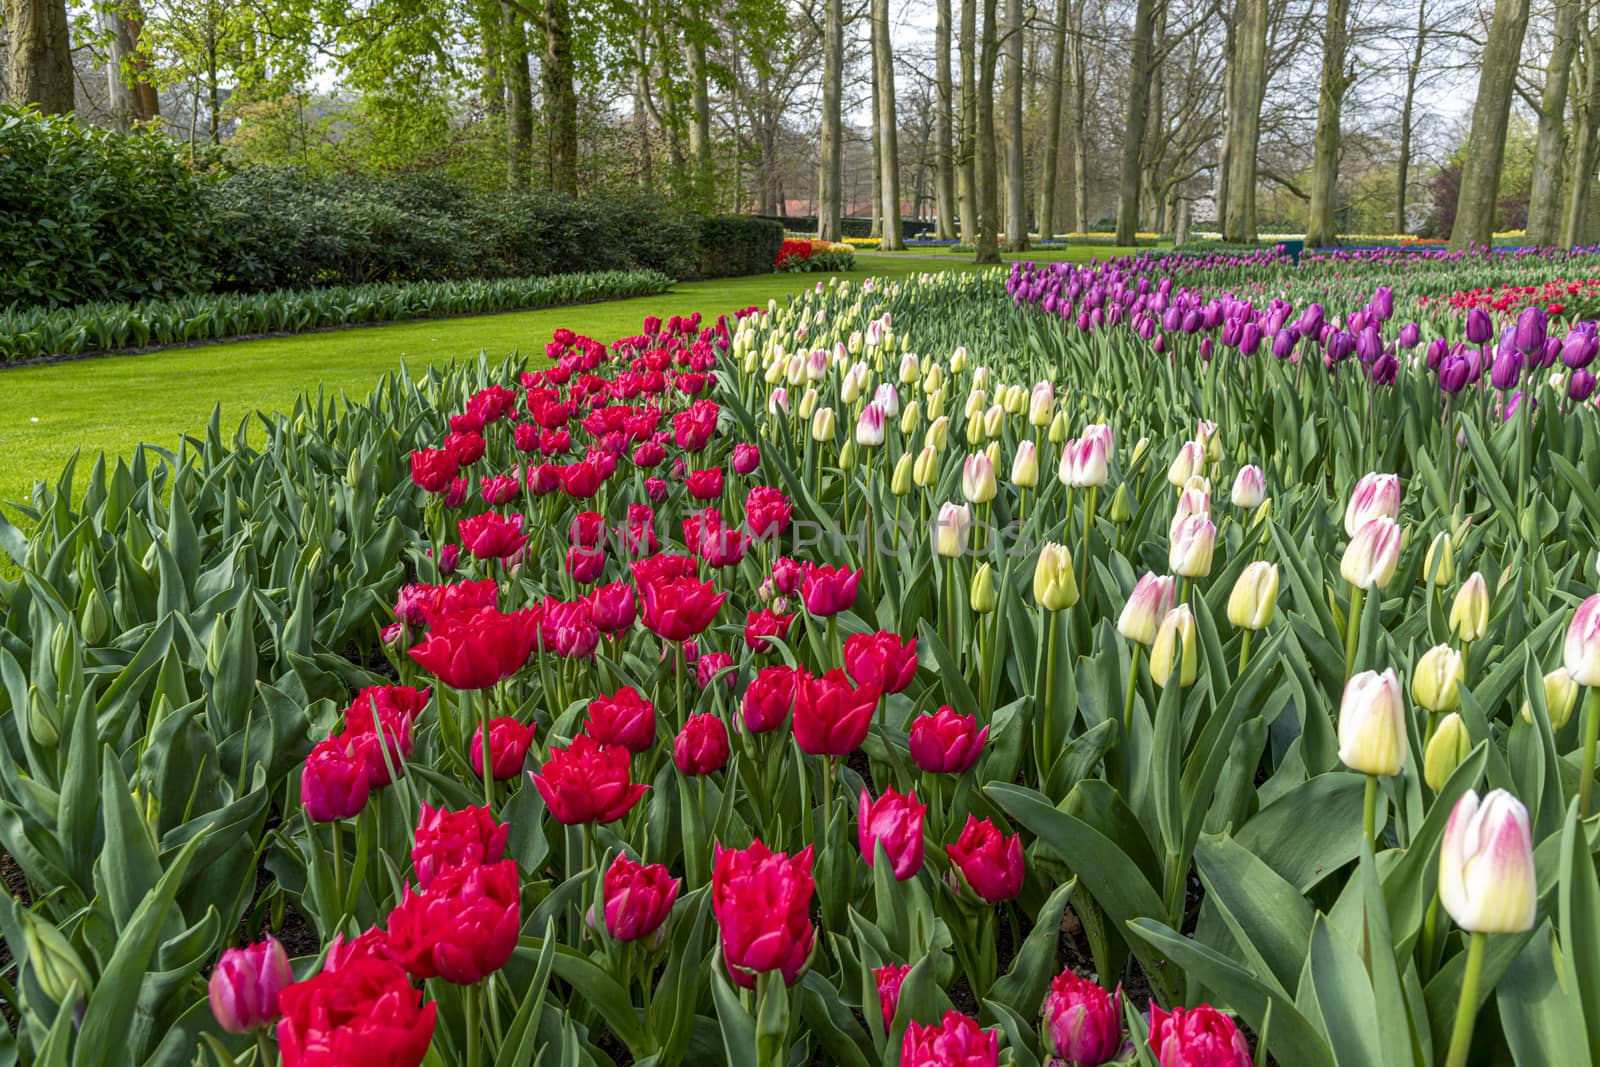 Multi color hyacinth, pure red, pink white color tulips blossom blooming under a very well maintained garden in spring time